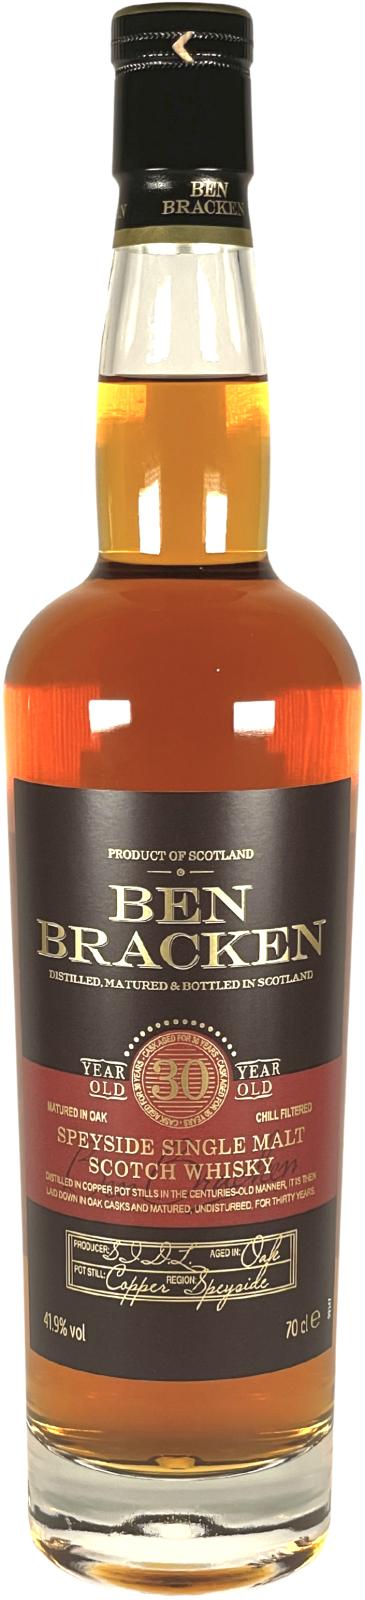 Ben TSID and Ratings - - Bracken 30-year-old reviews Whiskybase